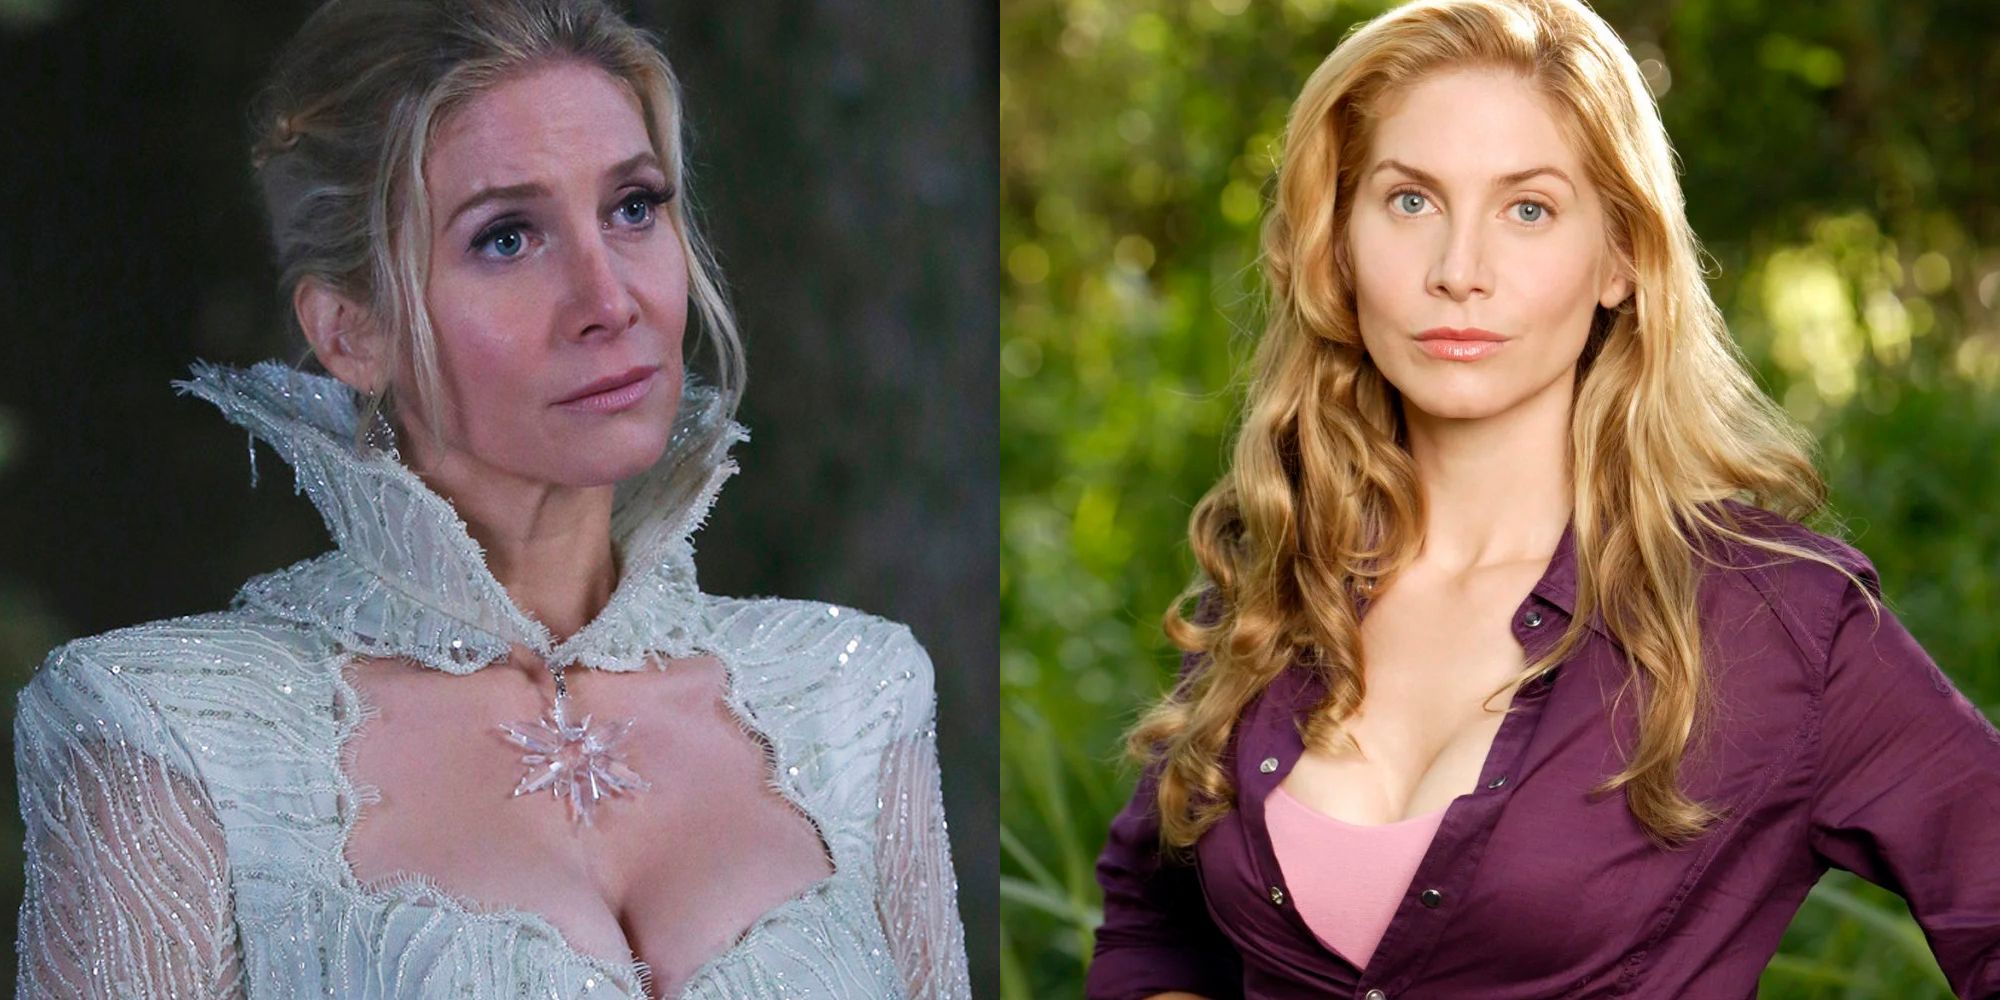 Elizabeth Mitchell plays the Snow Queen and Juliet in Once Upon a Time and Lost